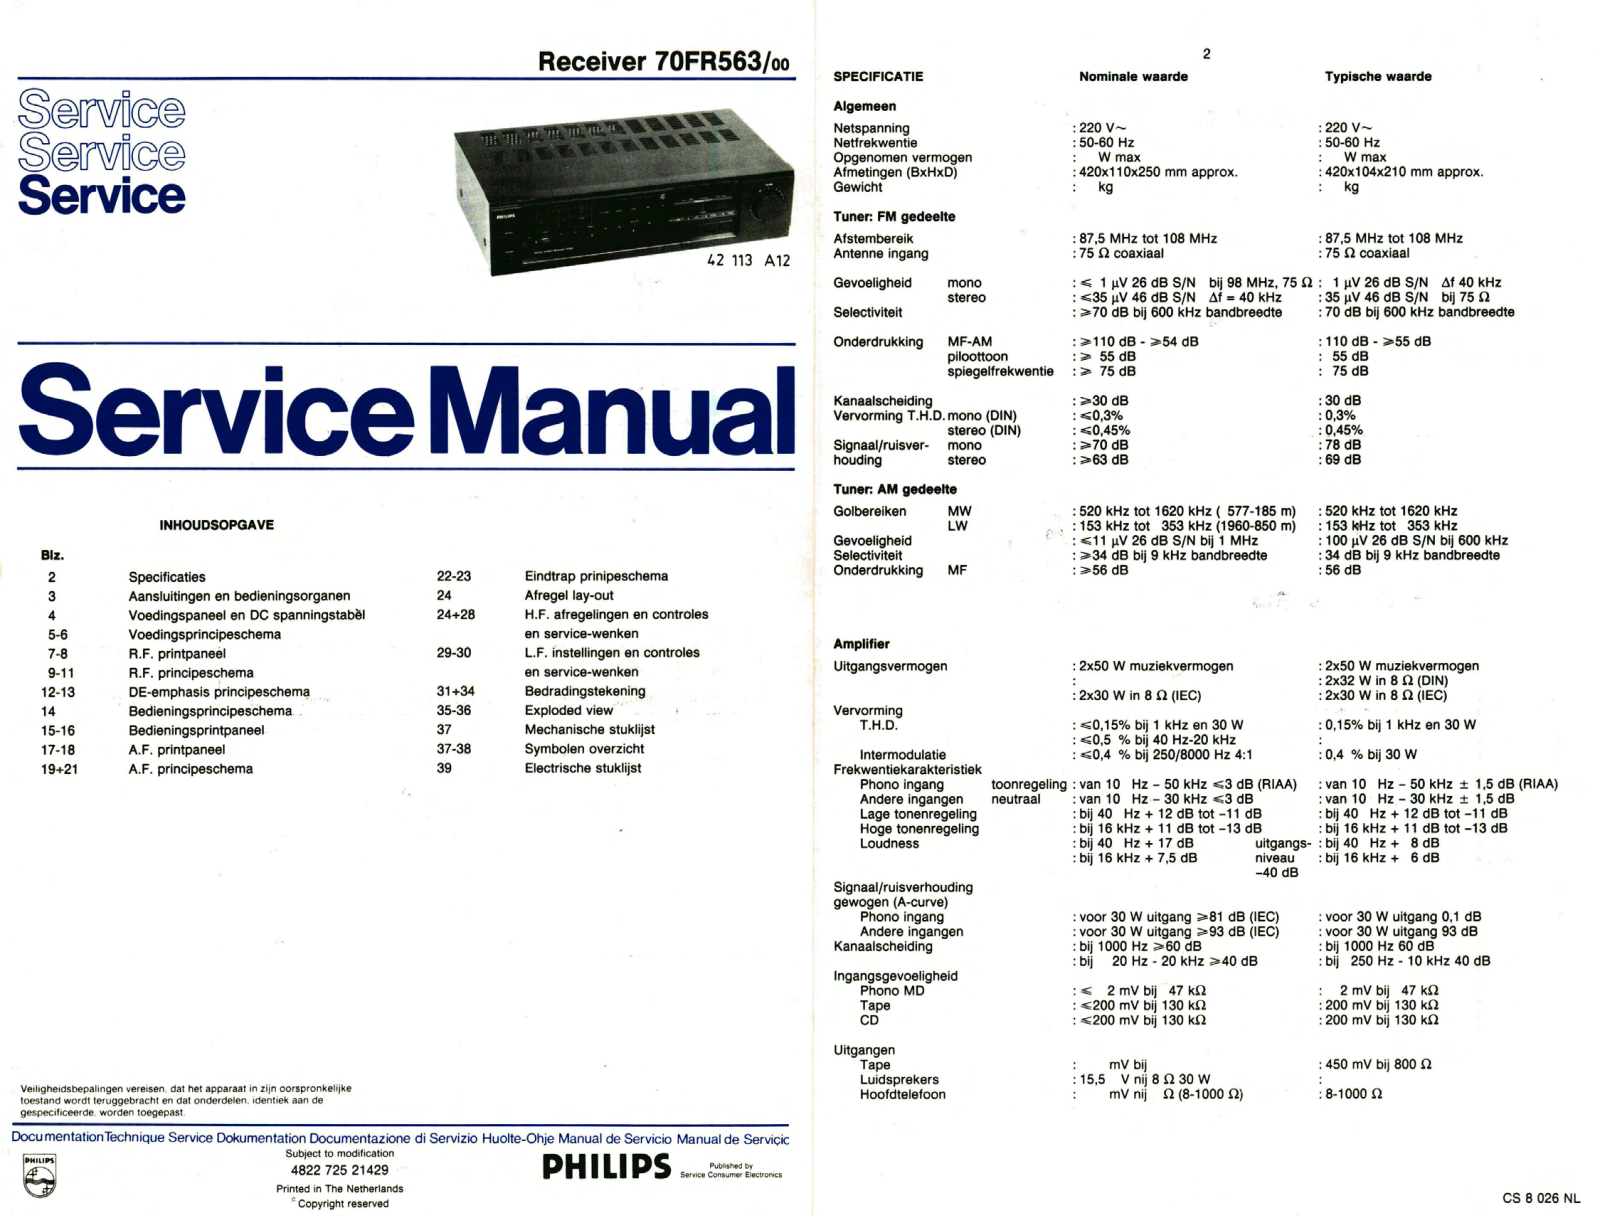 Philips FR-563 Service Manual